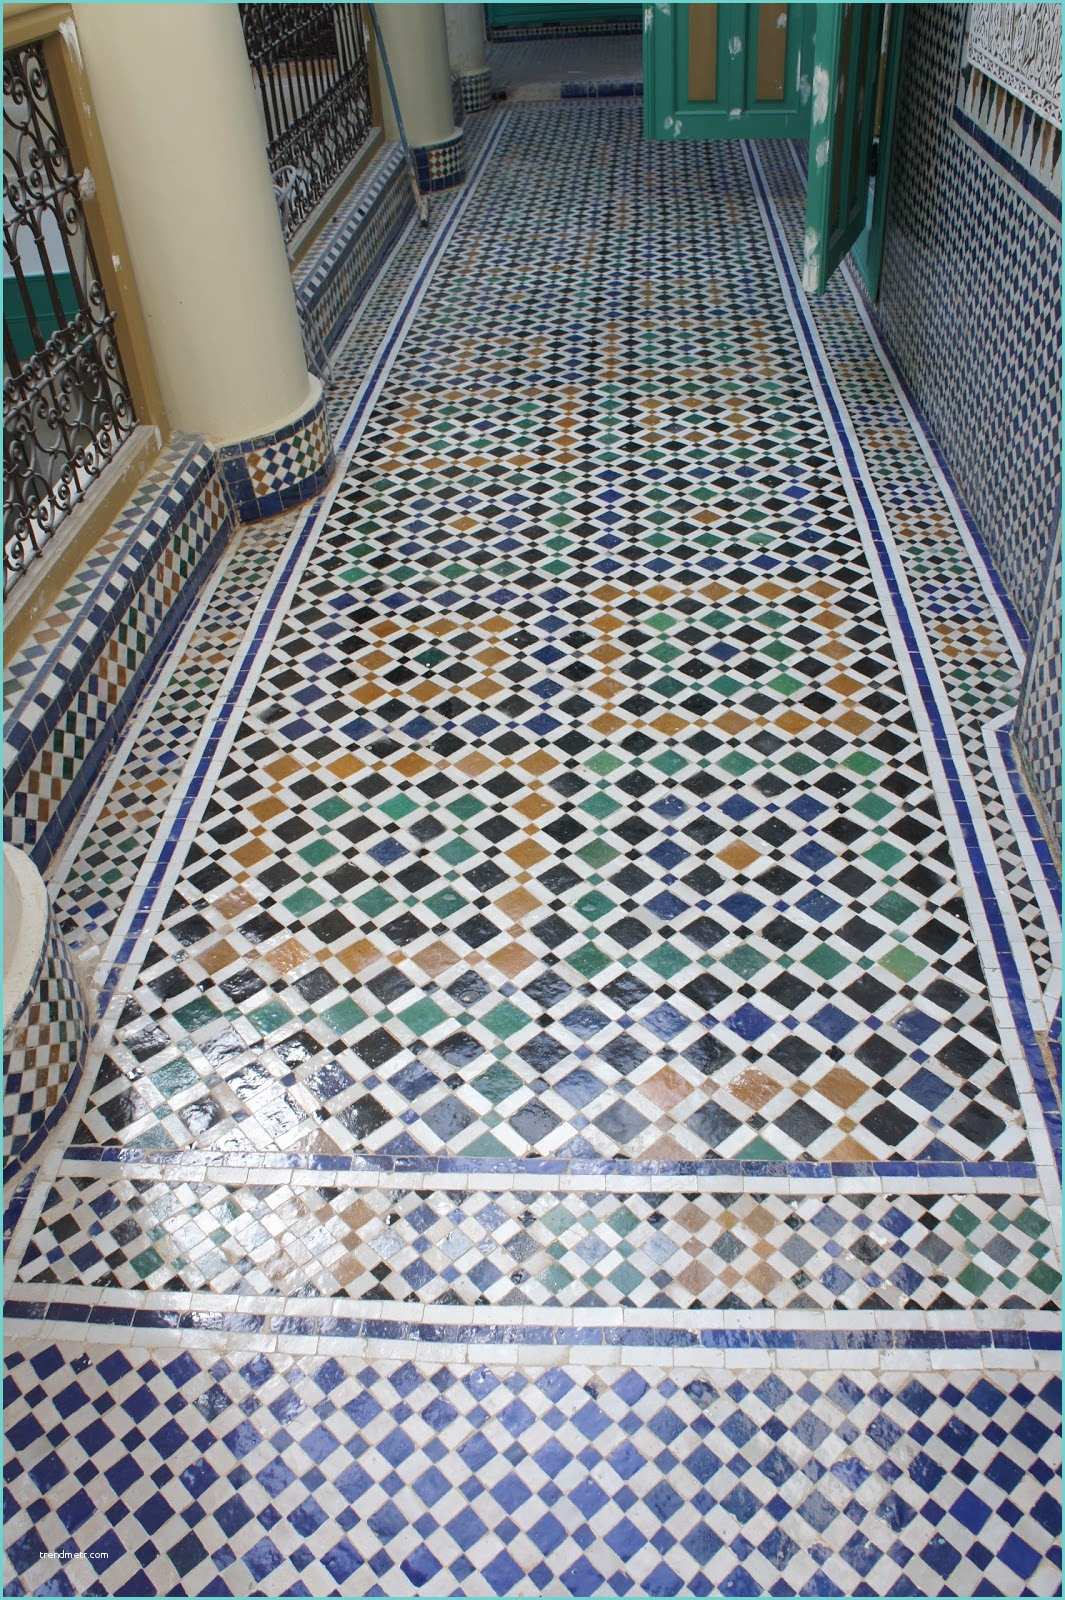 Morroccan Floor Tiles 1000 Images About Moroccan Patterns On Pinterest